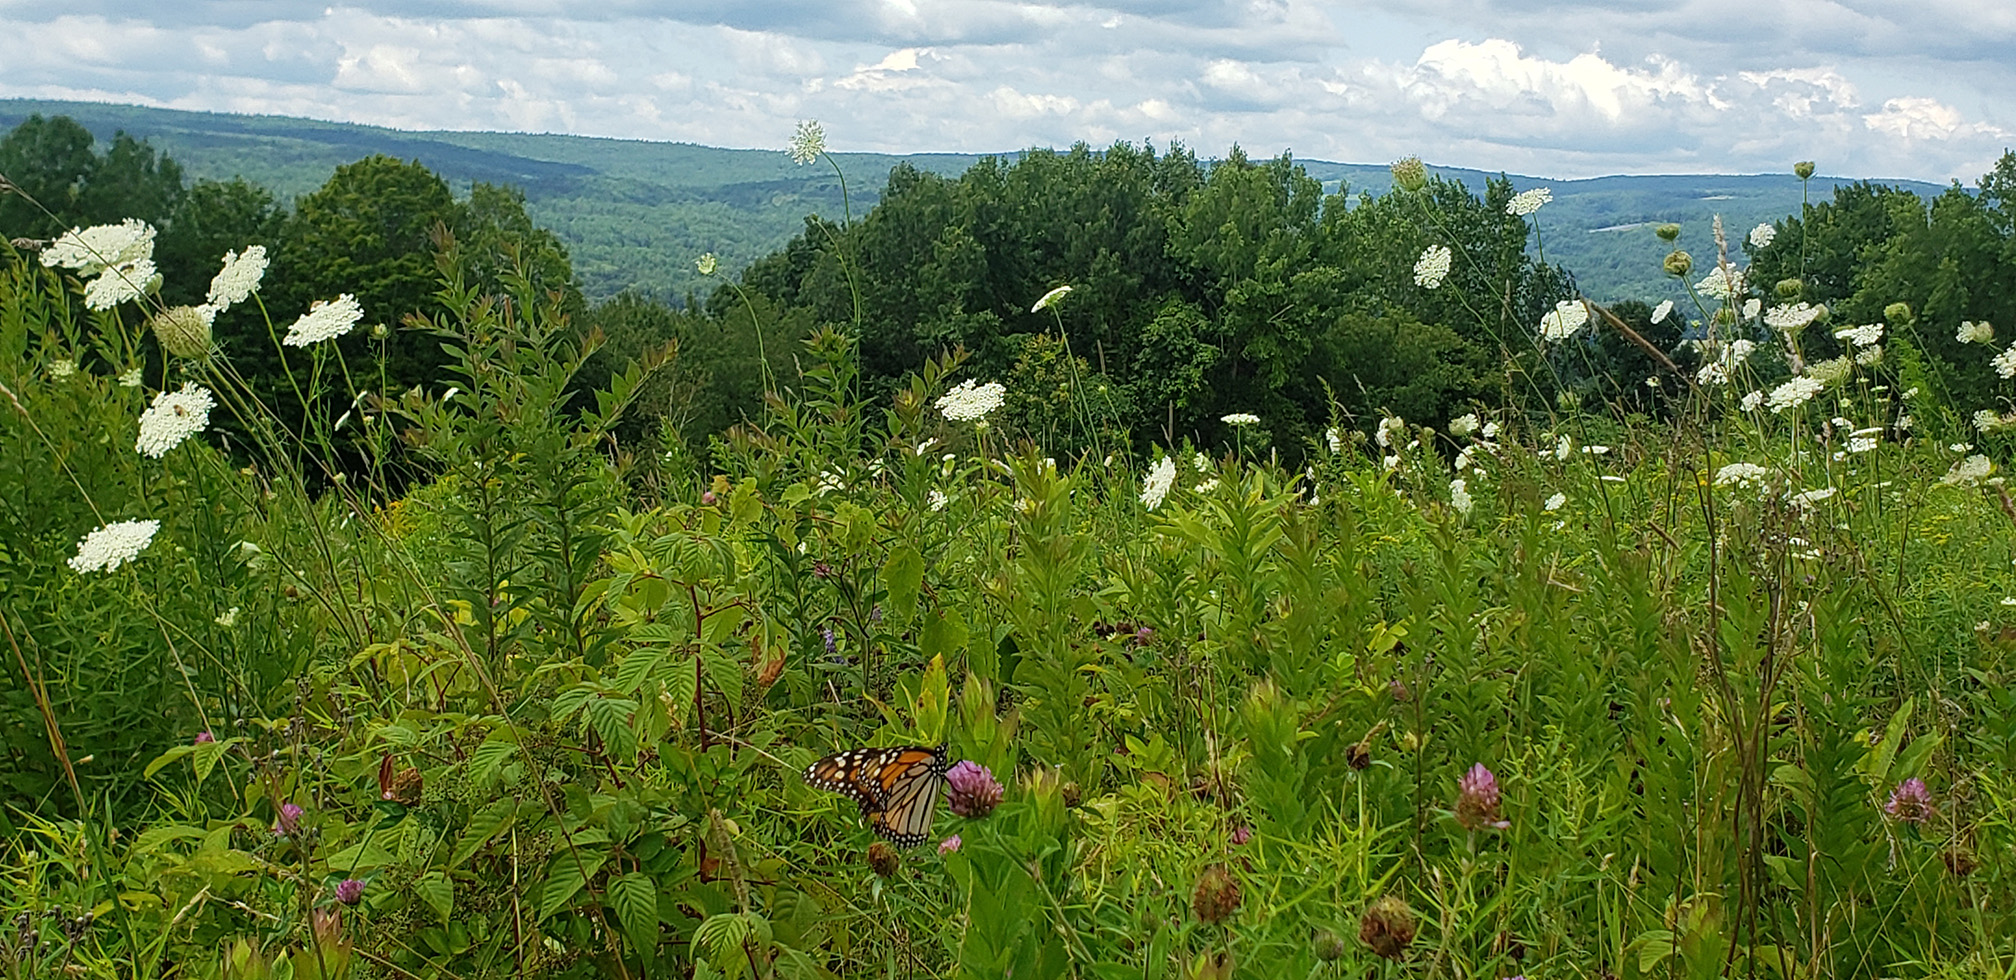 This photograph shows flowers blooming along the edge of an orchard. The flowers include the white disk-shaped flower heads of Queen Anne’s lace and dark-pink ball-shaped flower heads of red clover. An orange-and-black monarch butterfly is resting on one of the clover flowers. In the distance can be seen green forest covering gently sloping hills. The sky has white and pale gray clouds.